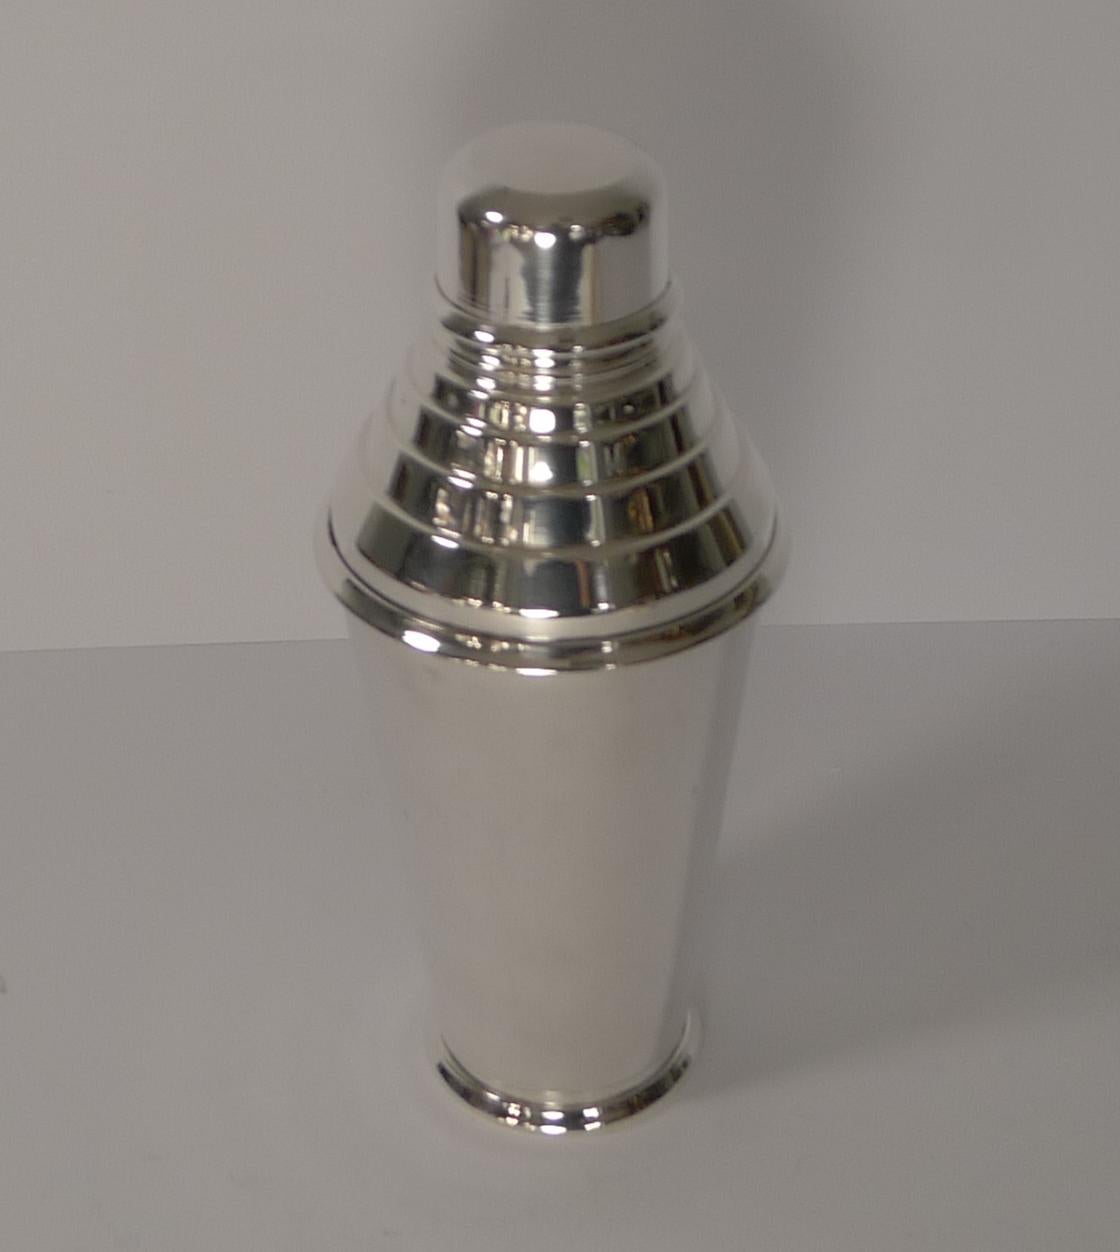 A fine English Art Deco cocktail shaker, silver plated and made for the luxury London retailer, Harrods. Fully signed on the underside 